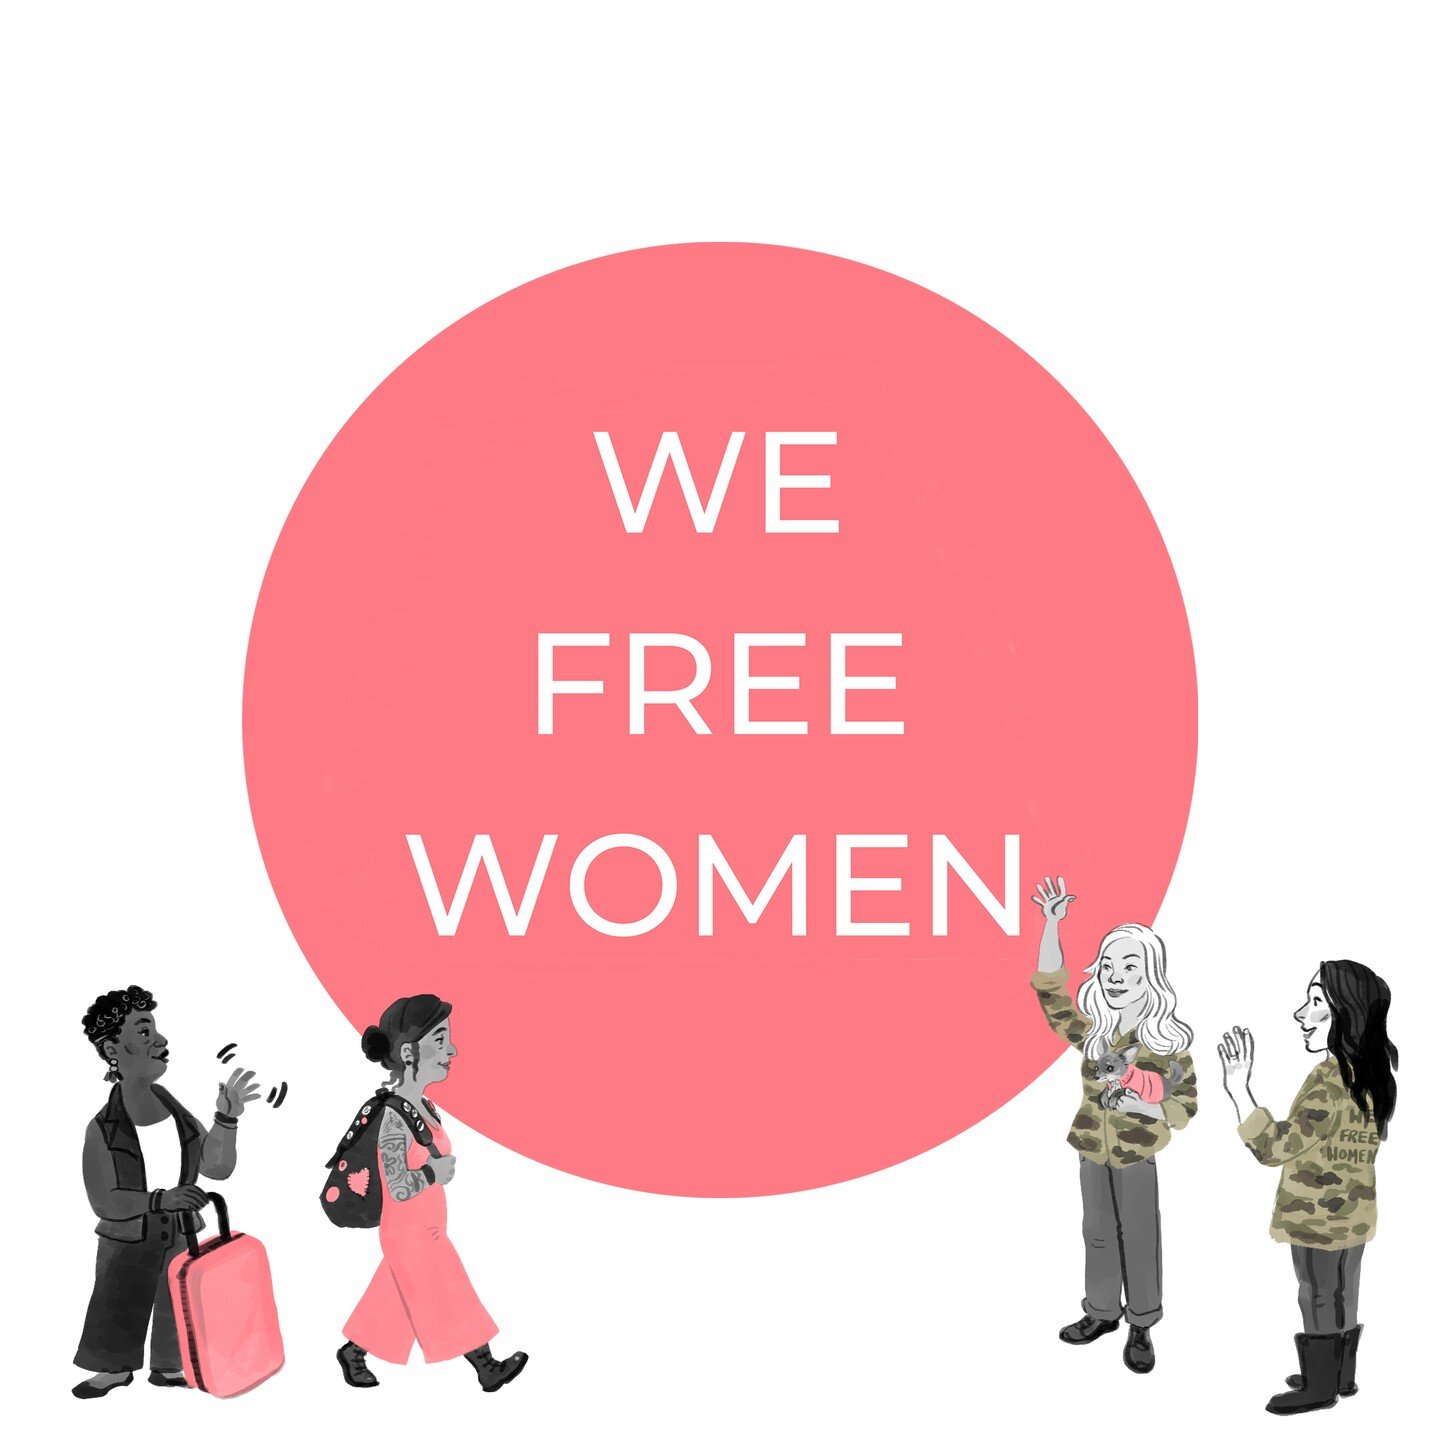 We have been working with @wearecognitive who have very kindly donated us a whiteboard animation to explain what We Free Women is all about, we are super excited to share the animation in the next few weeks. Here is a sneak preview of some of the stu